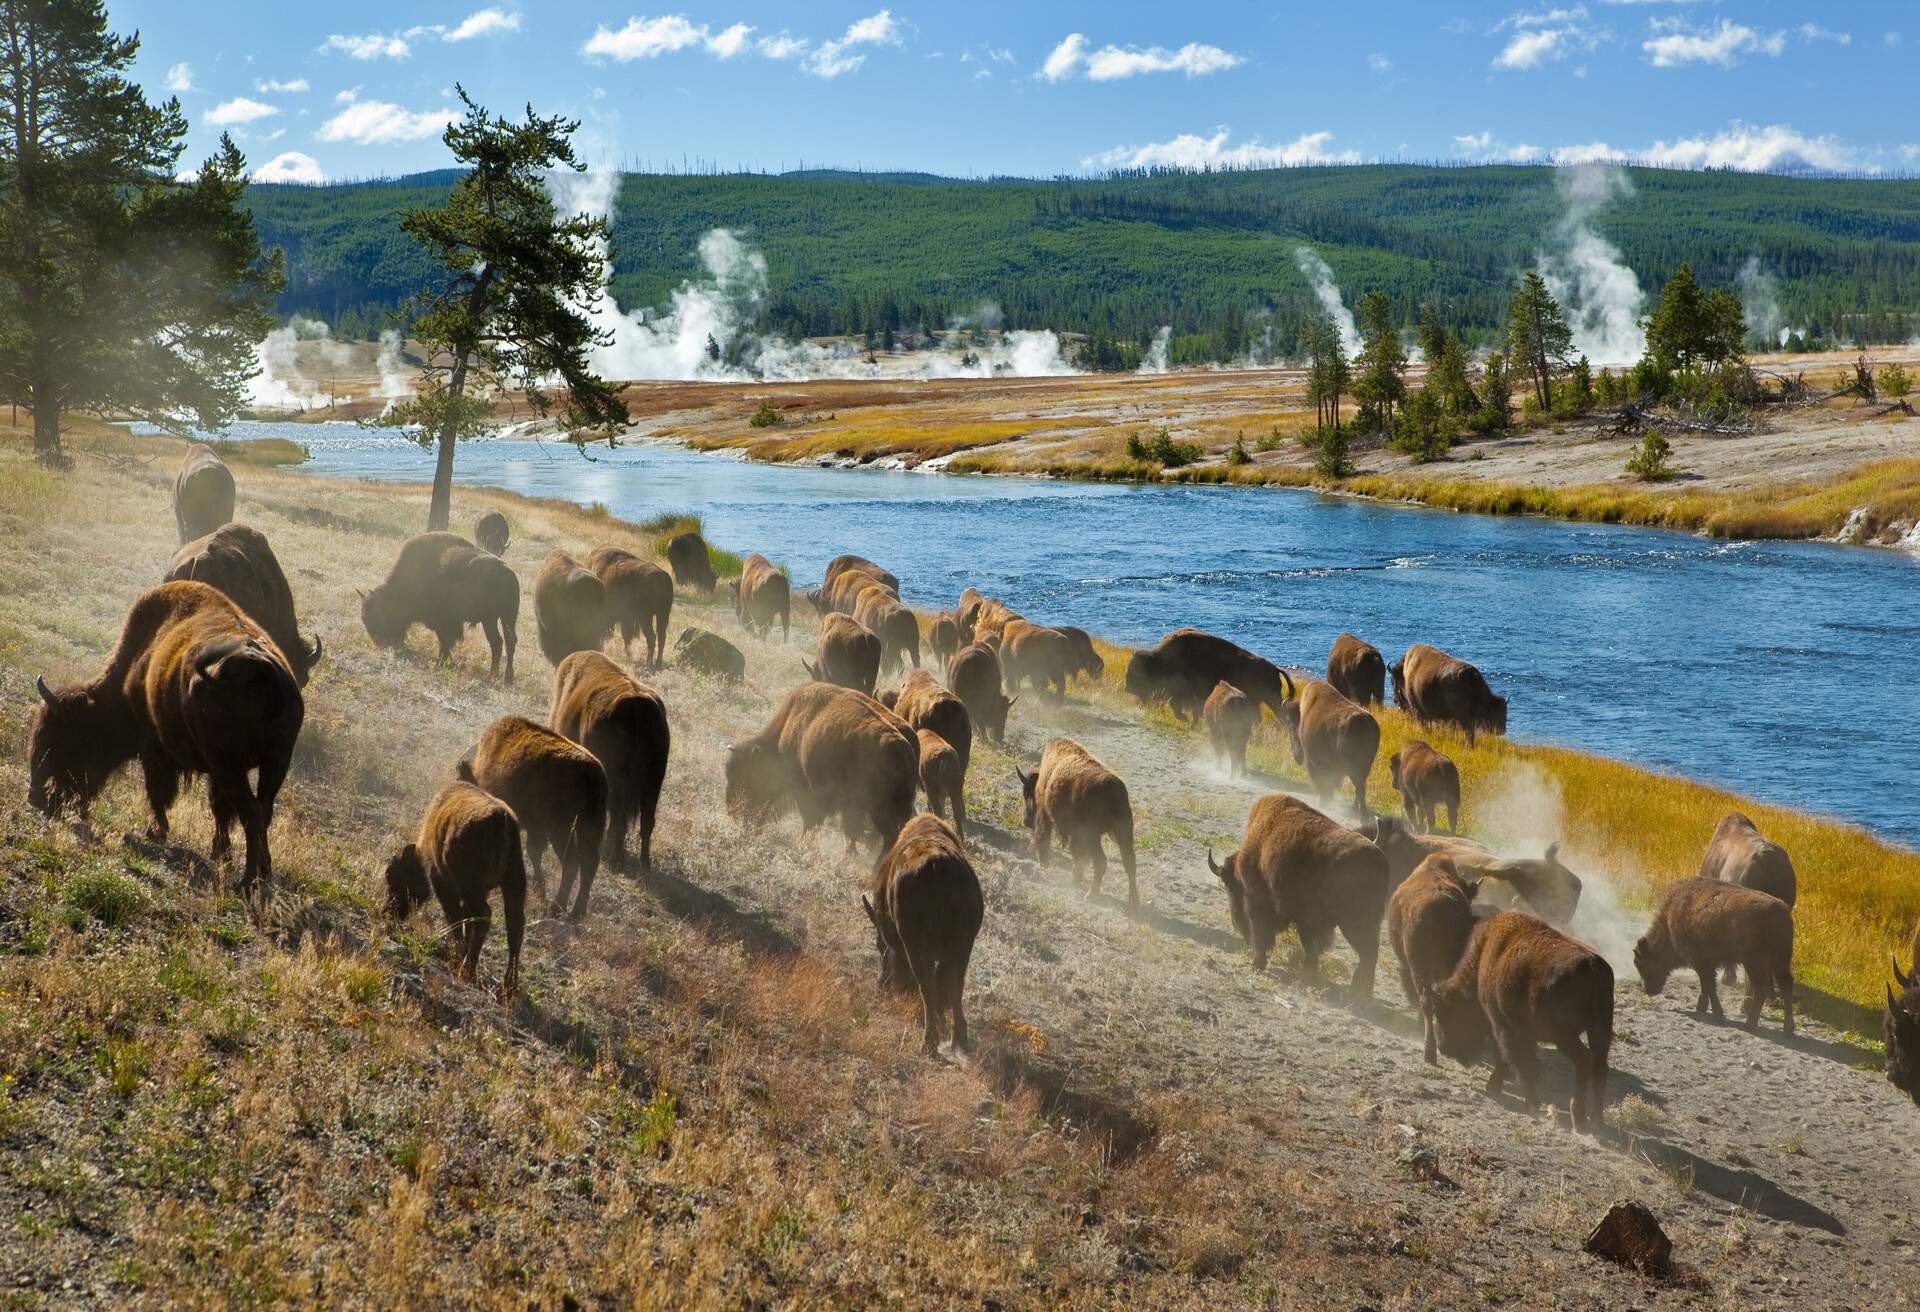 DEST_USA_WYOMING_YELLOWSTONE NATIONAL PARK_FIREHOLE RIVER_shutterstock-premier_47311708